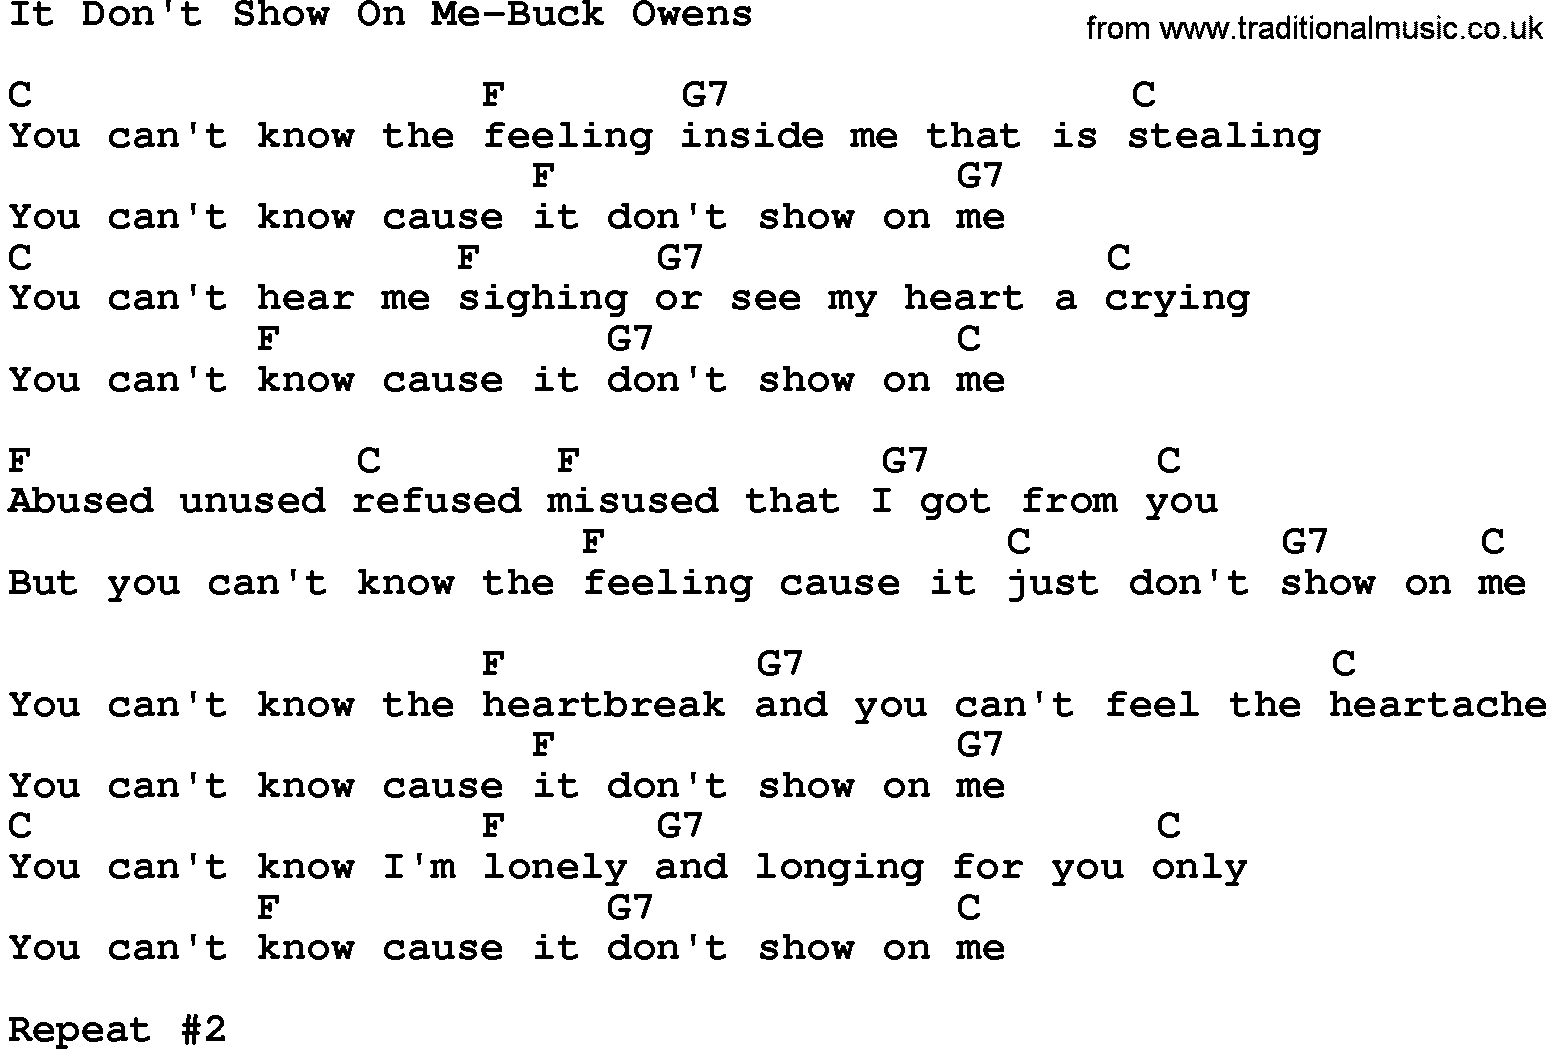 Country Music:It Don't Show On Me-Buck Owens Lyrics and Chords